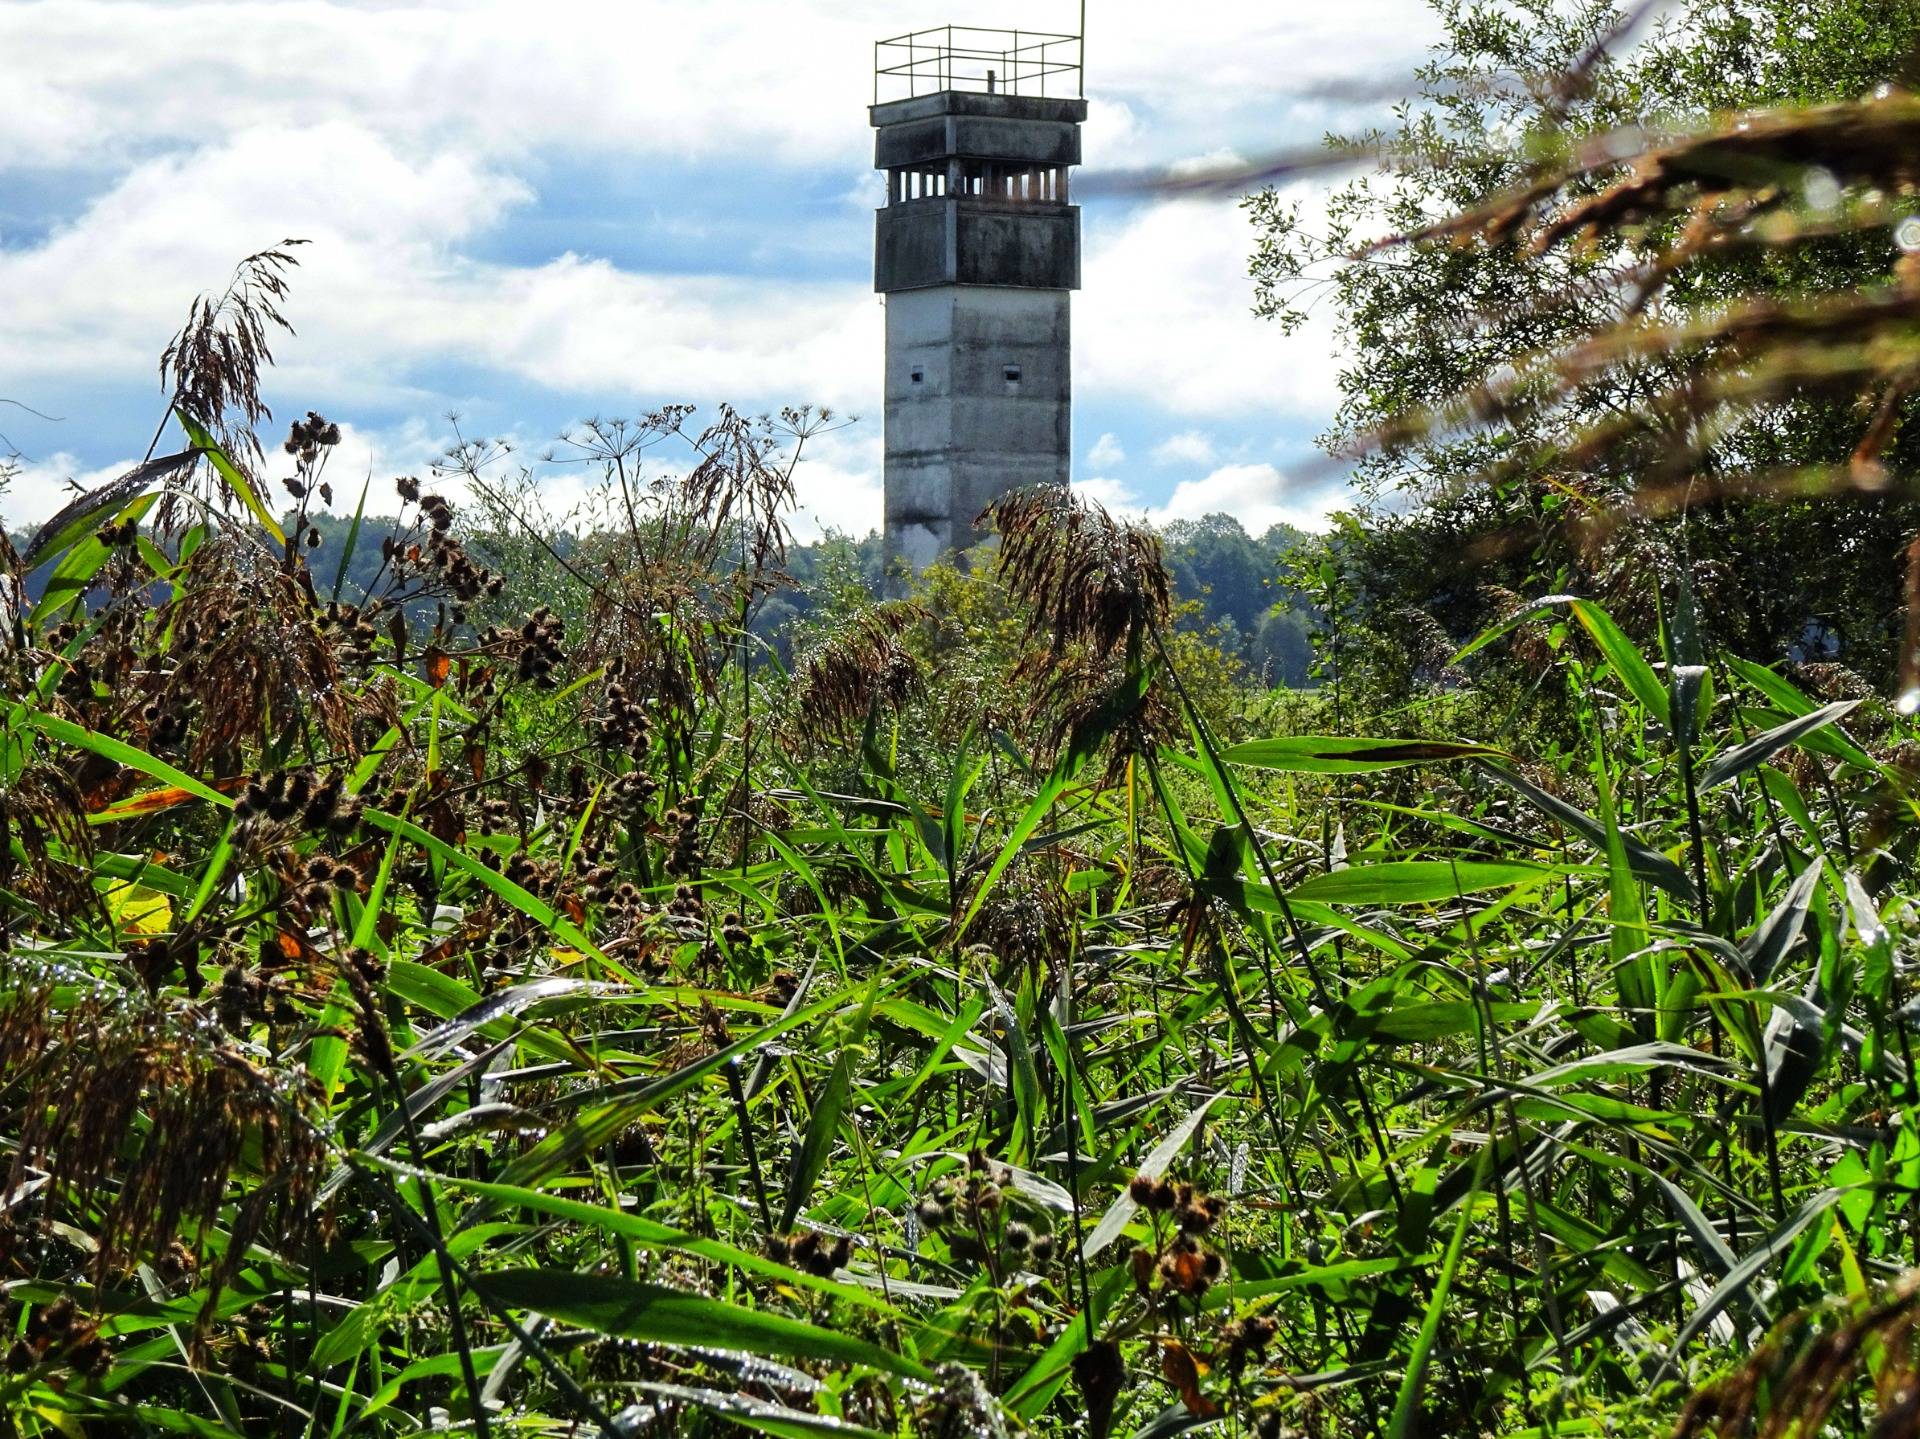 One of the last watchtowers on the Green Ribbon.